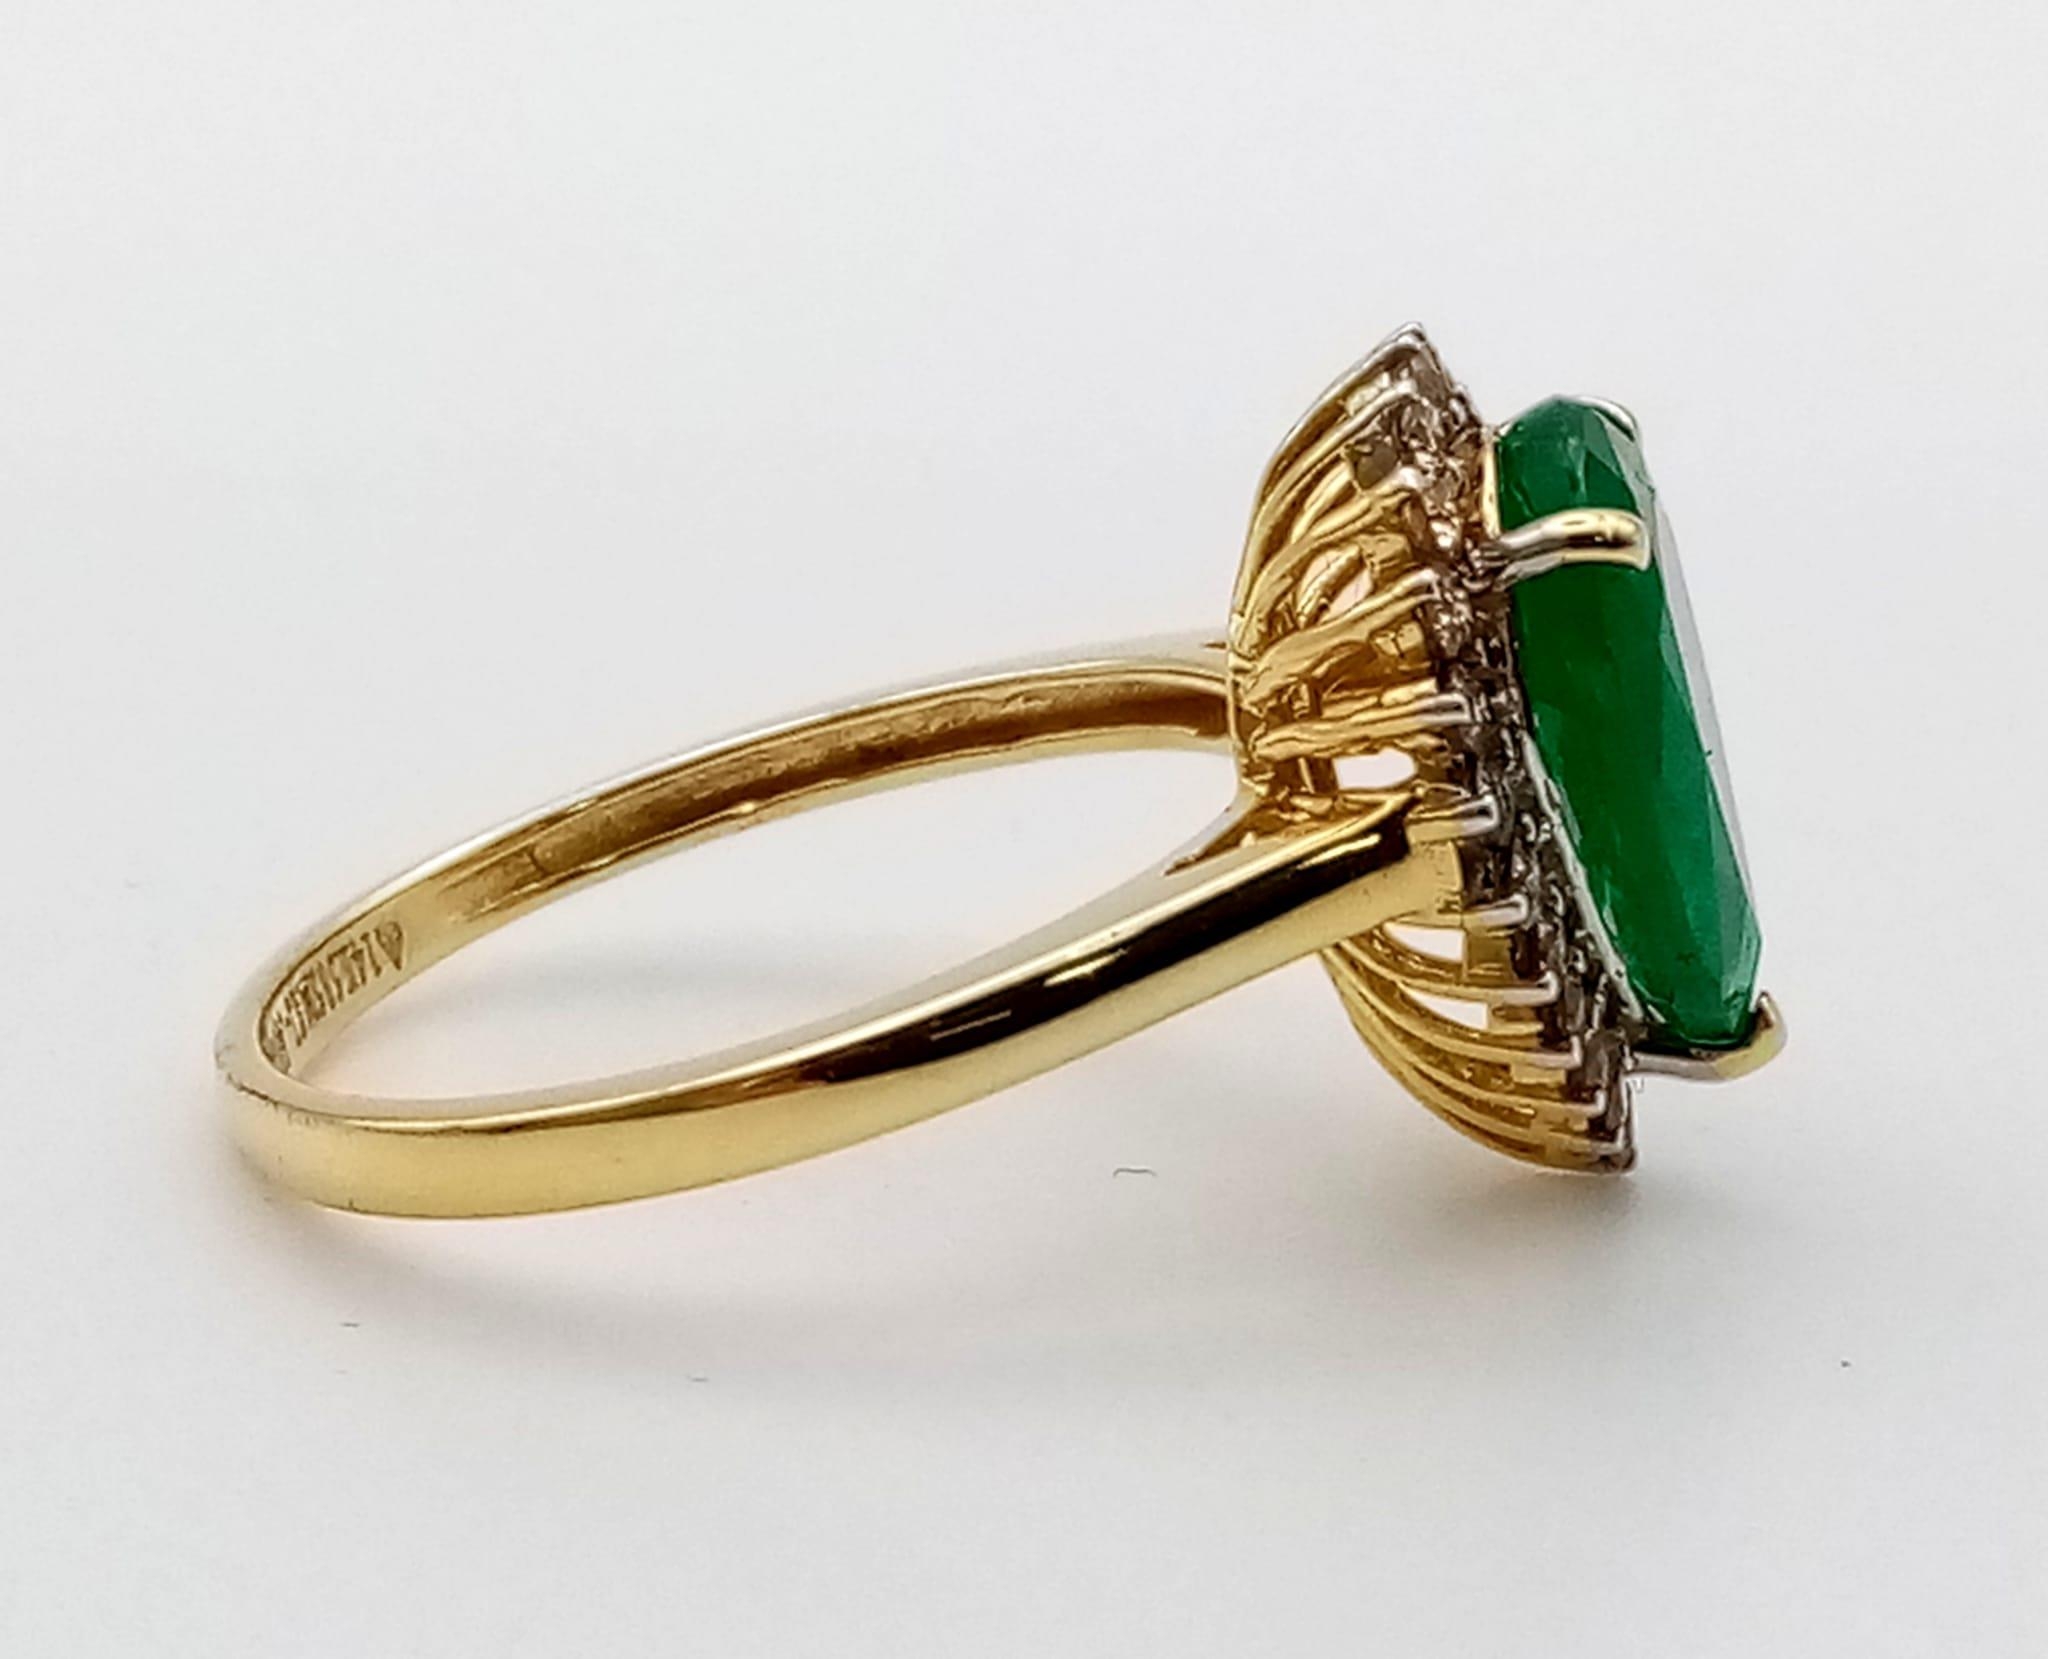 A 14K Yellow Gold 2.10ct Zambian Emerald with Diamond Surround (0.40ct) Ring. Size N/O. 2.9g total - Image 4 of 8